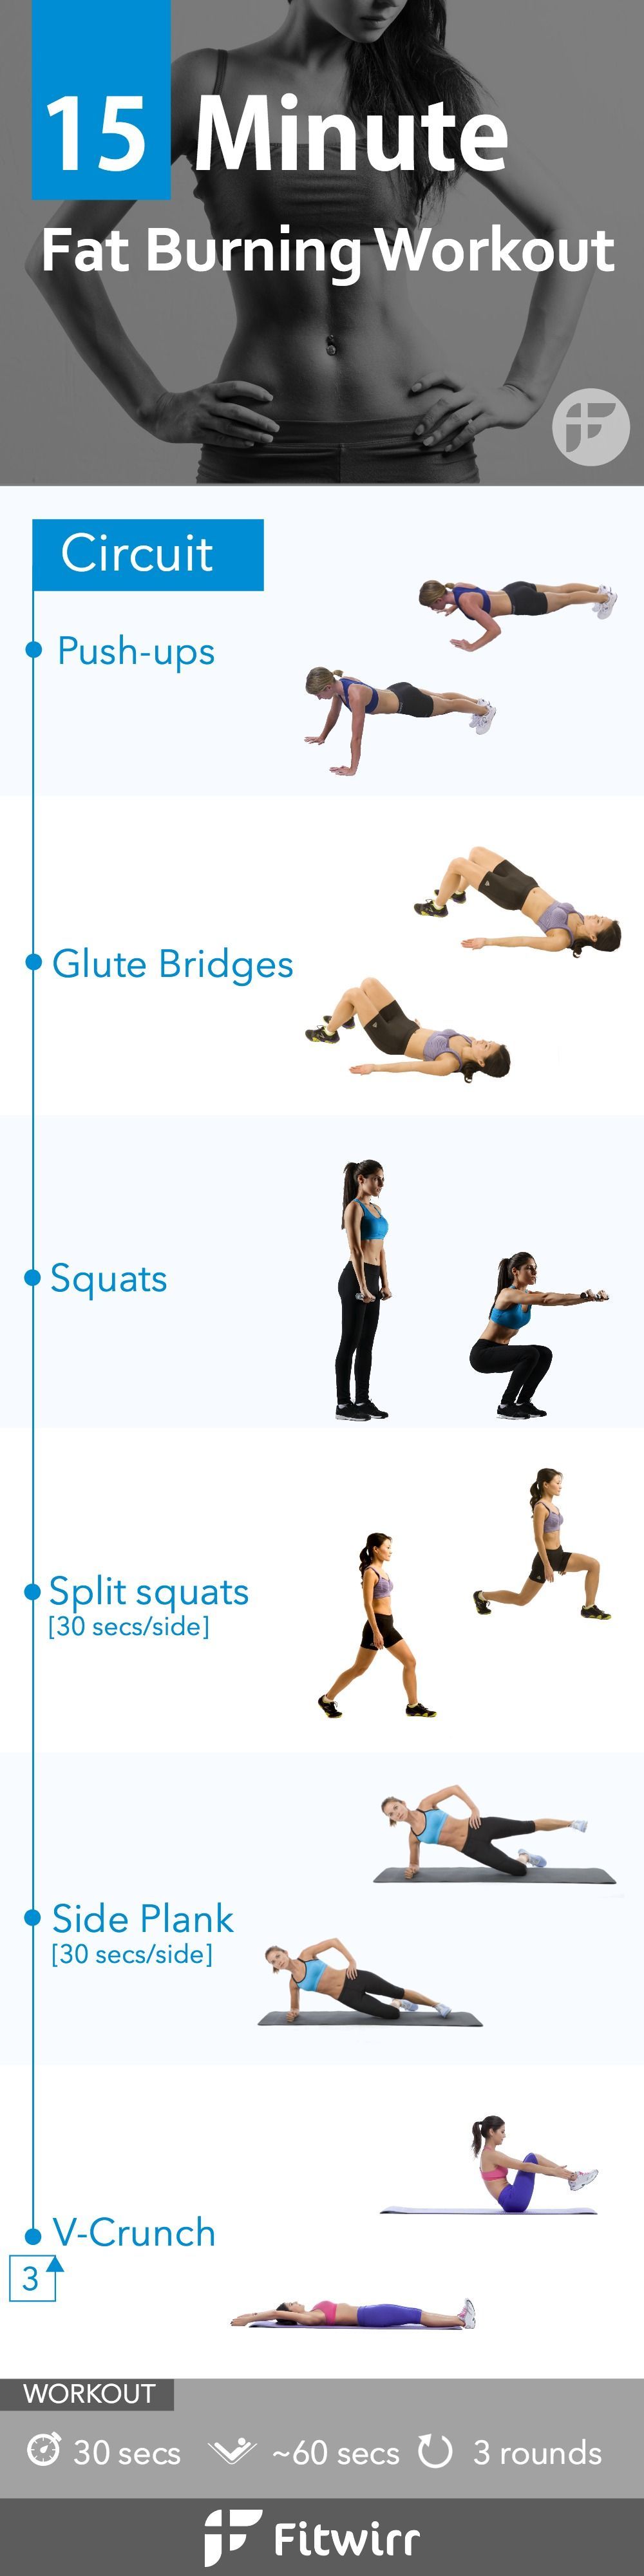 Need a quick workout you can do at home or in your hotel room? Here is a perfect workout for you. Hit it hard for 15 minutes to turn on your fat-burning hormone and get your body burning fat for up to